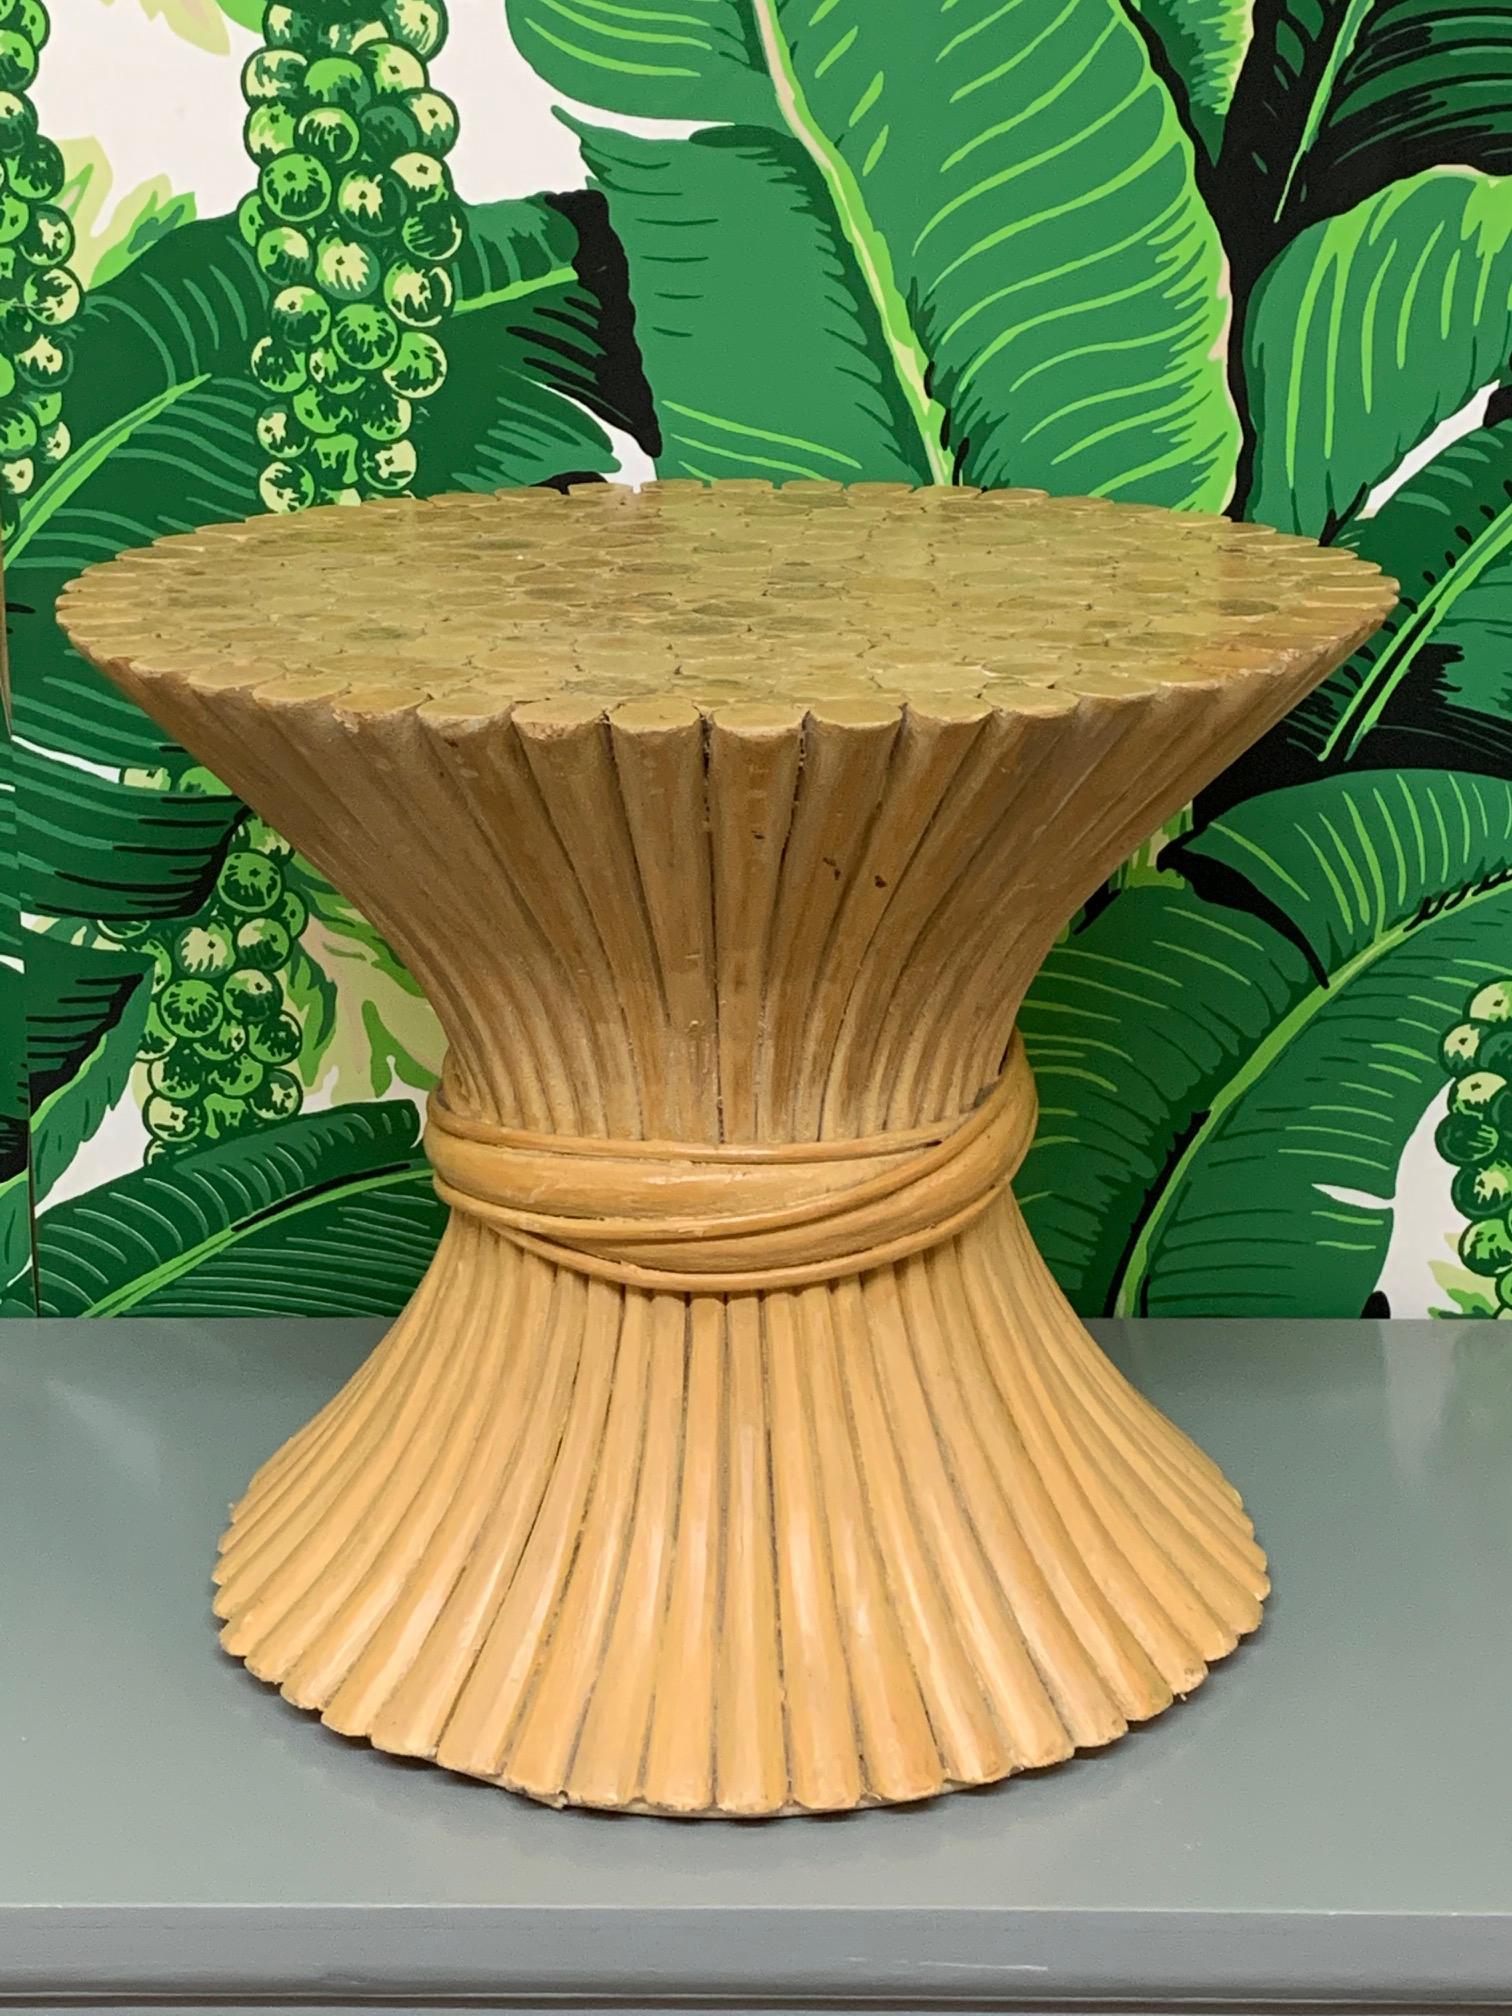 Sheaf of wheat rattan footstool or end table in the style of McGuire. Good condition with imperfections consistent with age, see photos for condition details.
For a shipping quote to your exact zip code, please message us.
